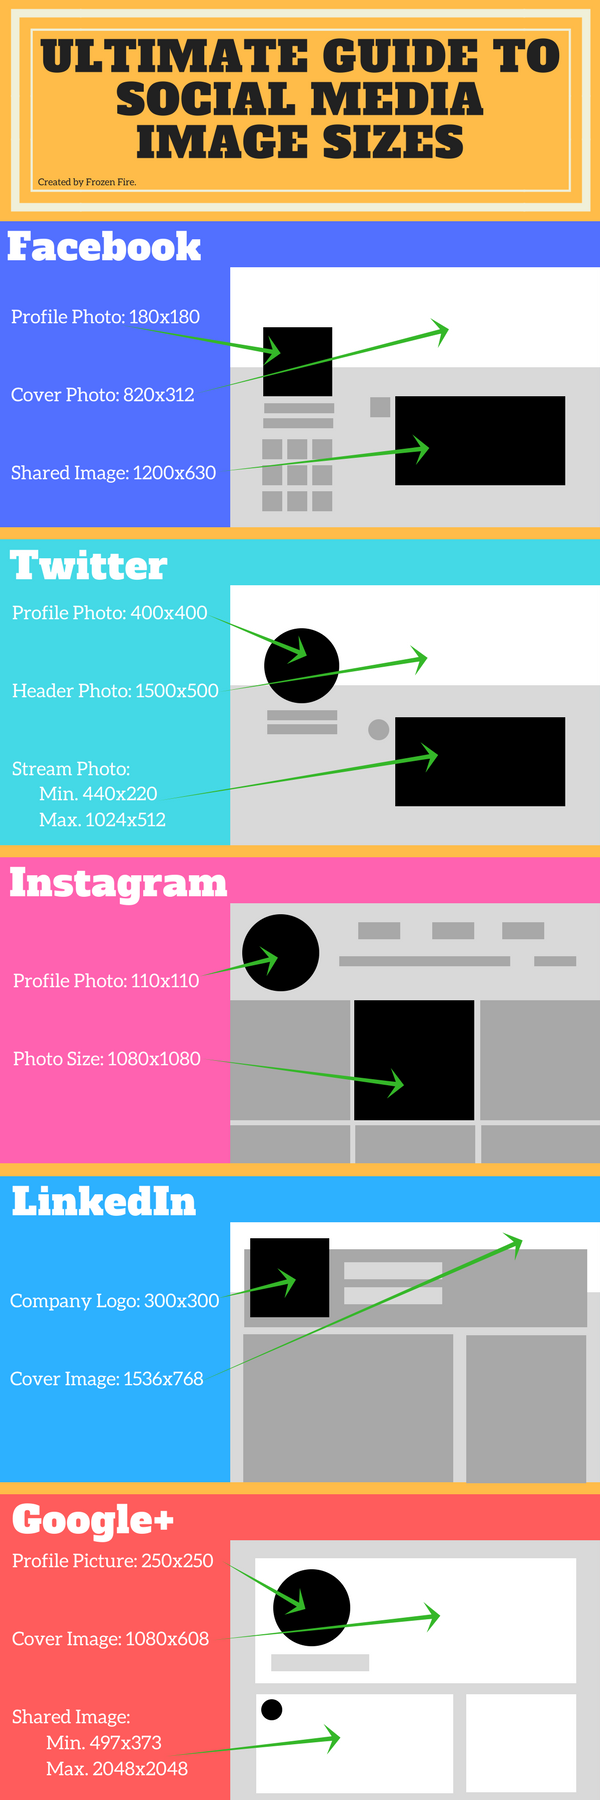 The Perfect Facebook Profile Picture Size | Frozen Fire